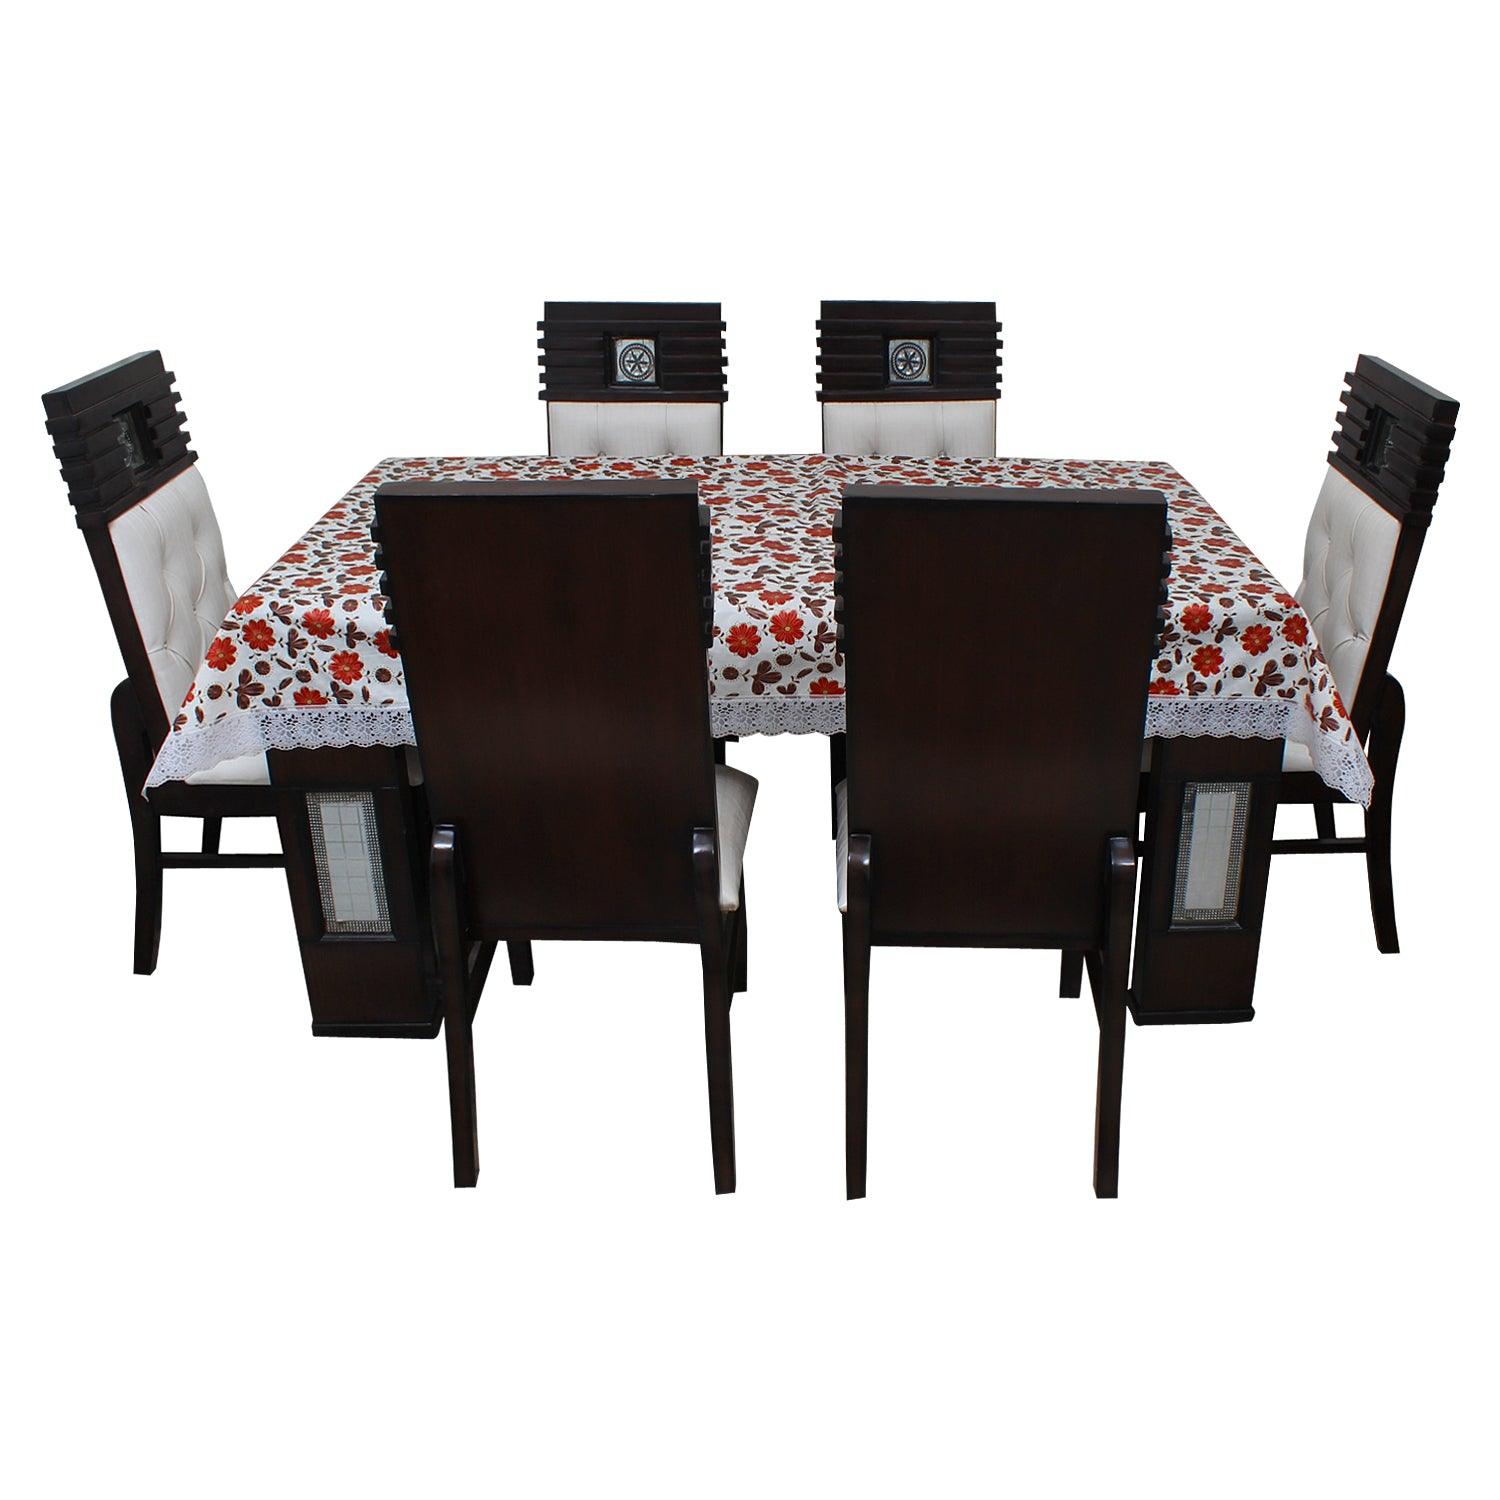 Waterproof and Dustproof Dining Table Cover, SA20 - Dream Care Furnishings Private Limited